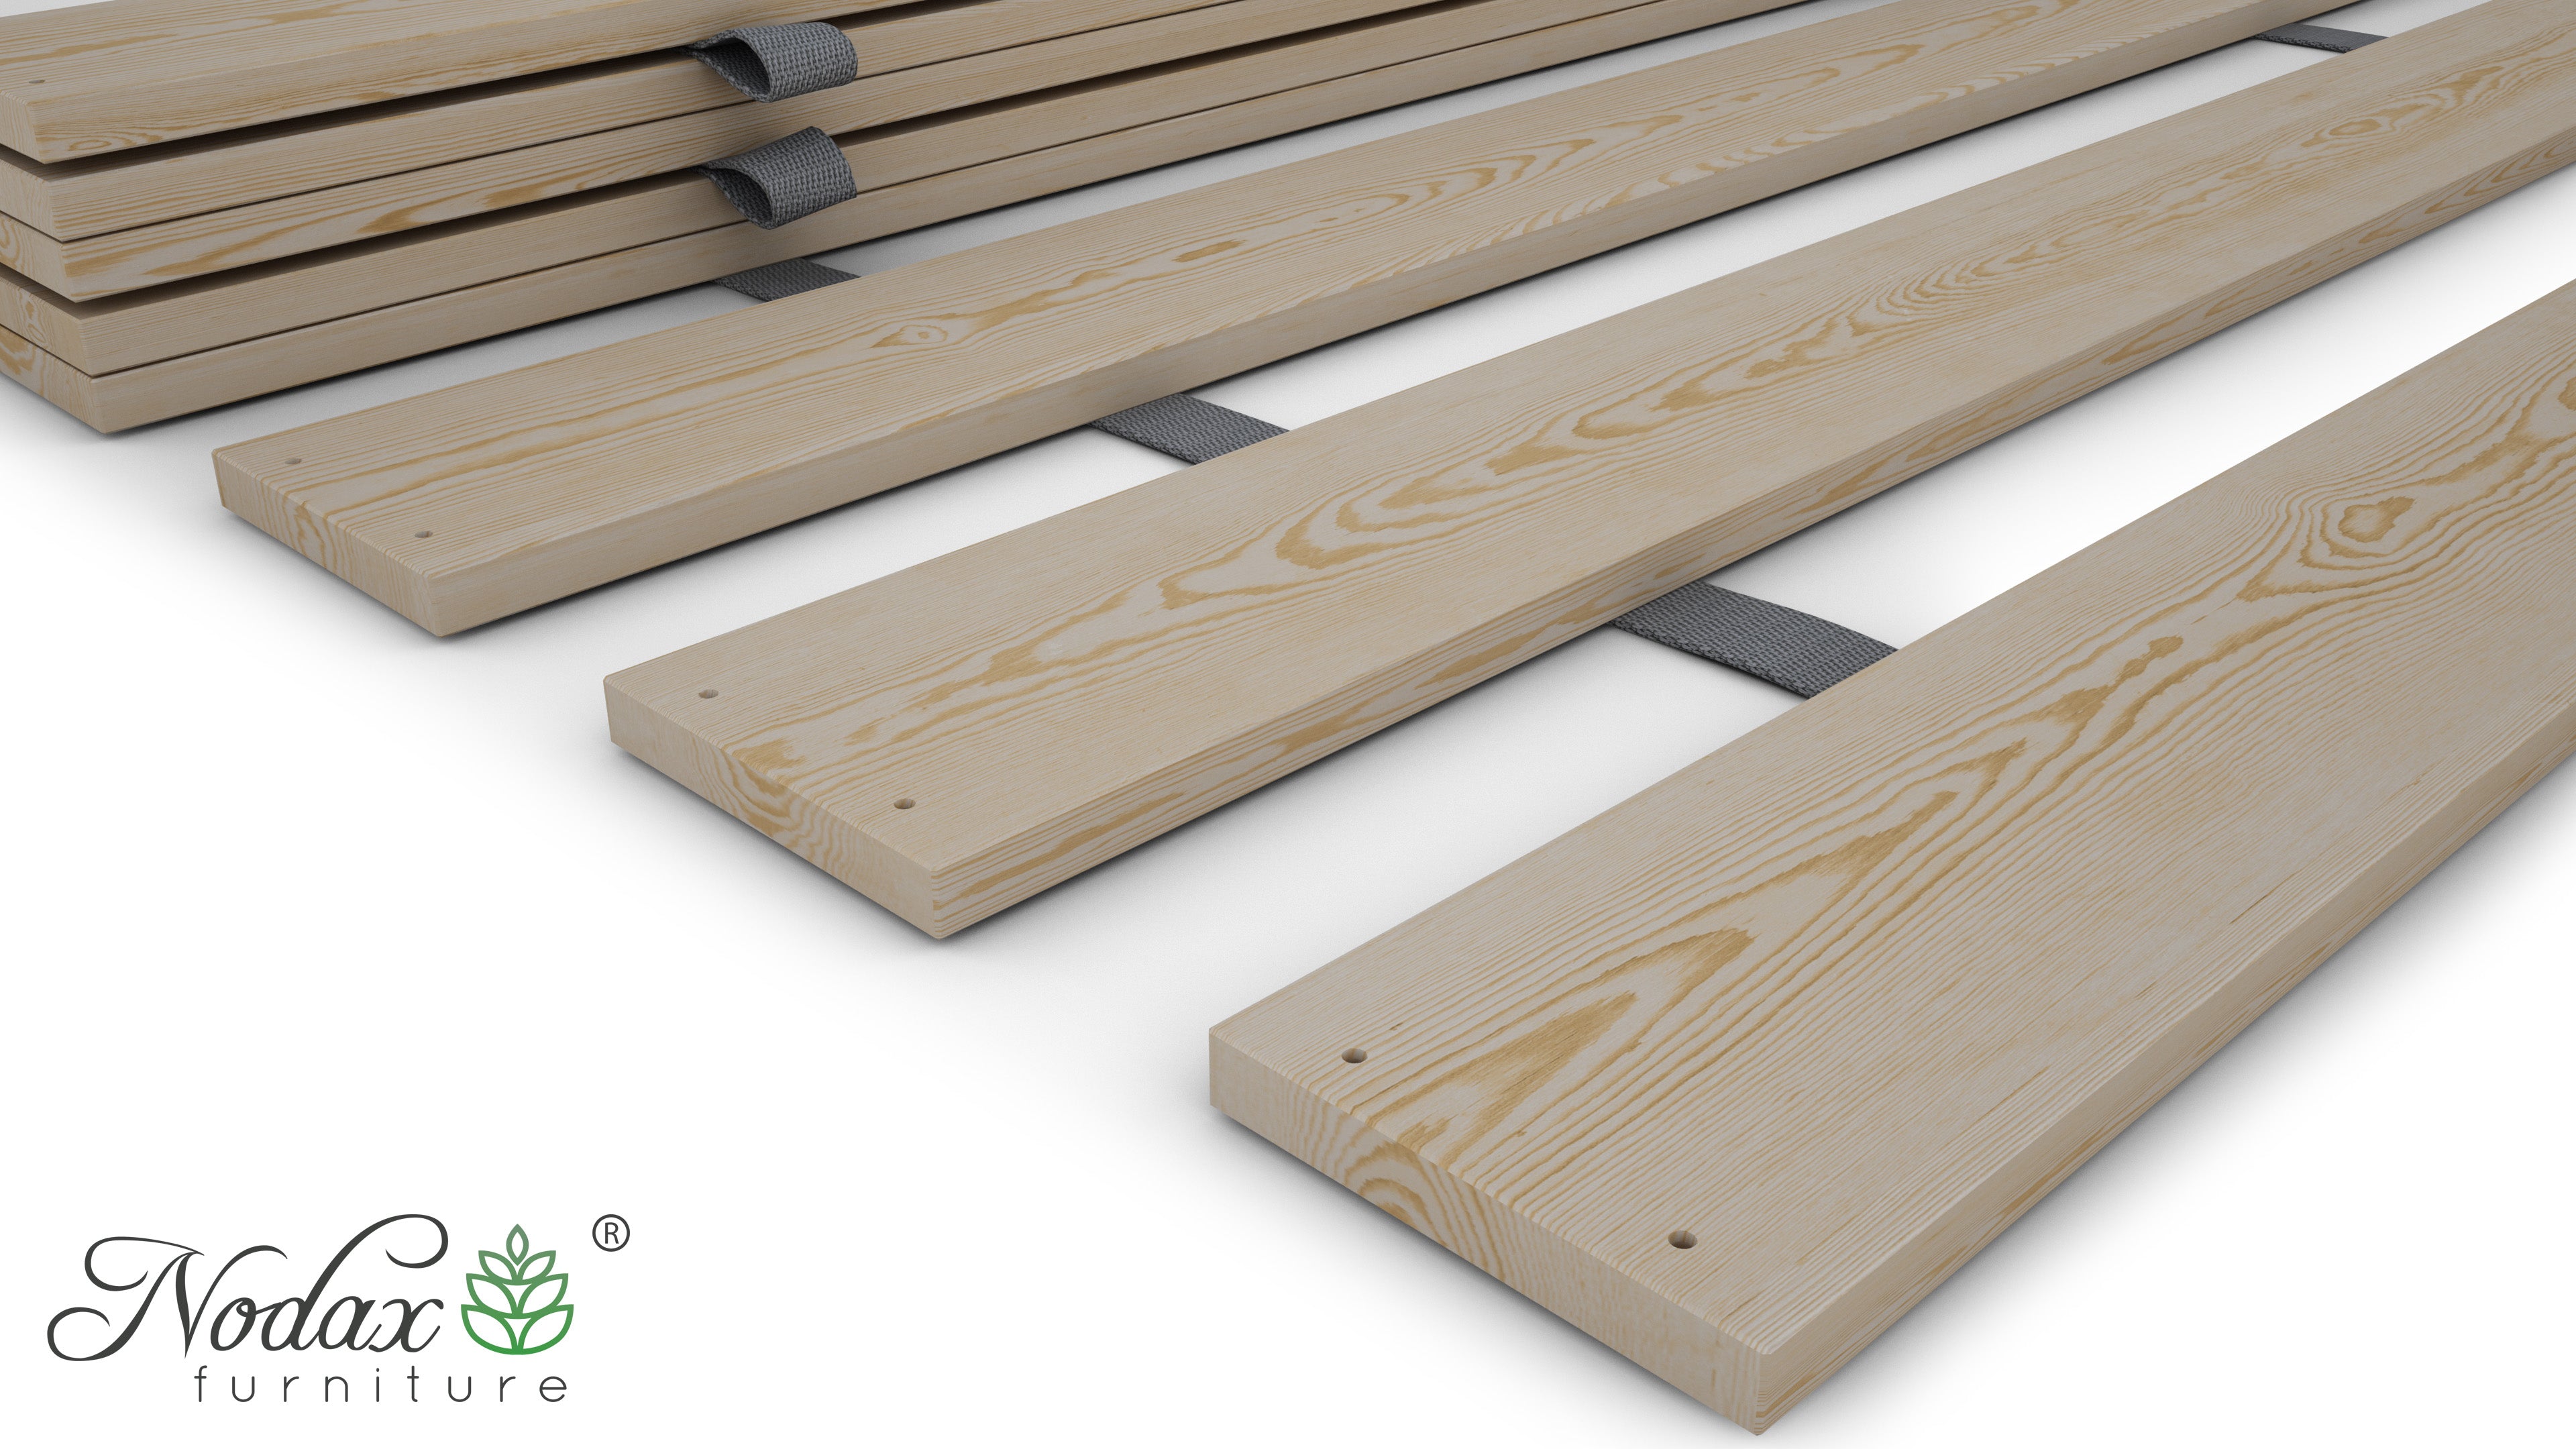 Solid-wooden-slats-SkyNordic